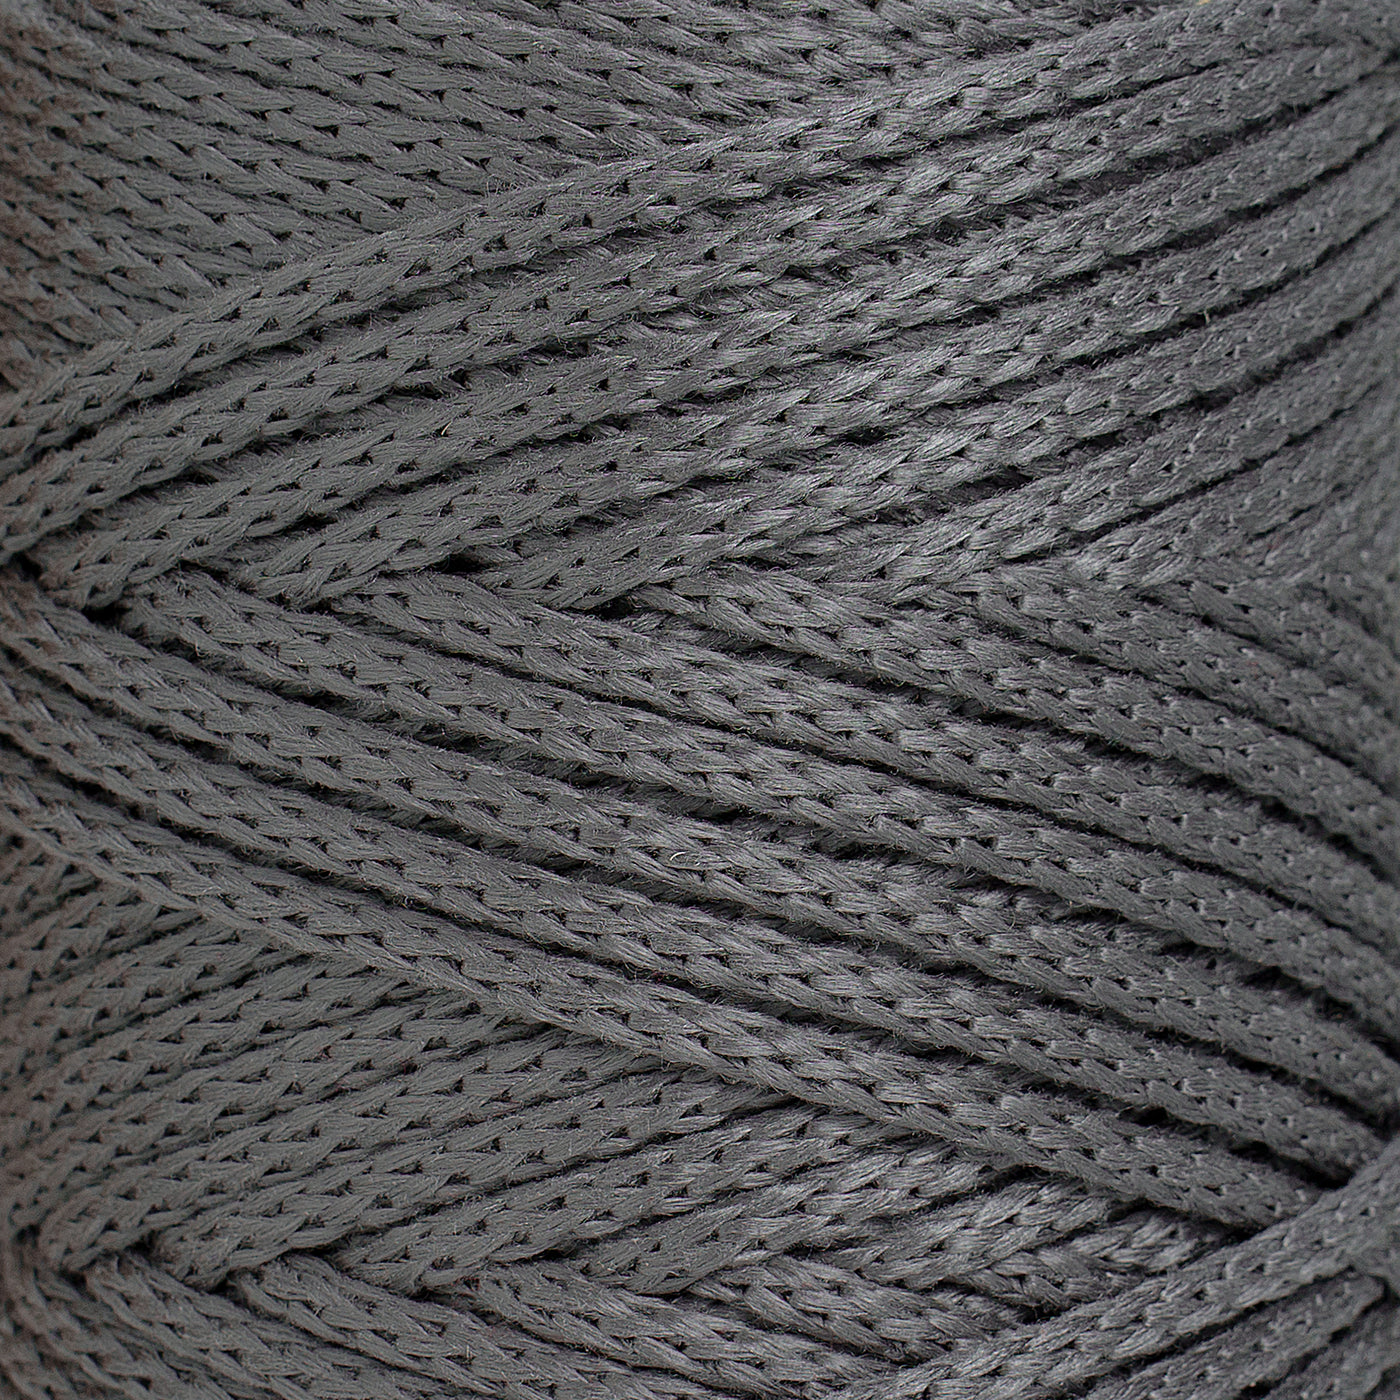 OUTDOOR RECYCLED BRAIDED CORD 6 MM -  CHARCOAL GRAY COLOR